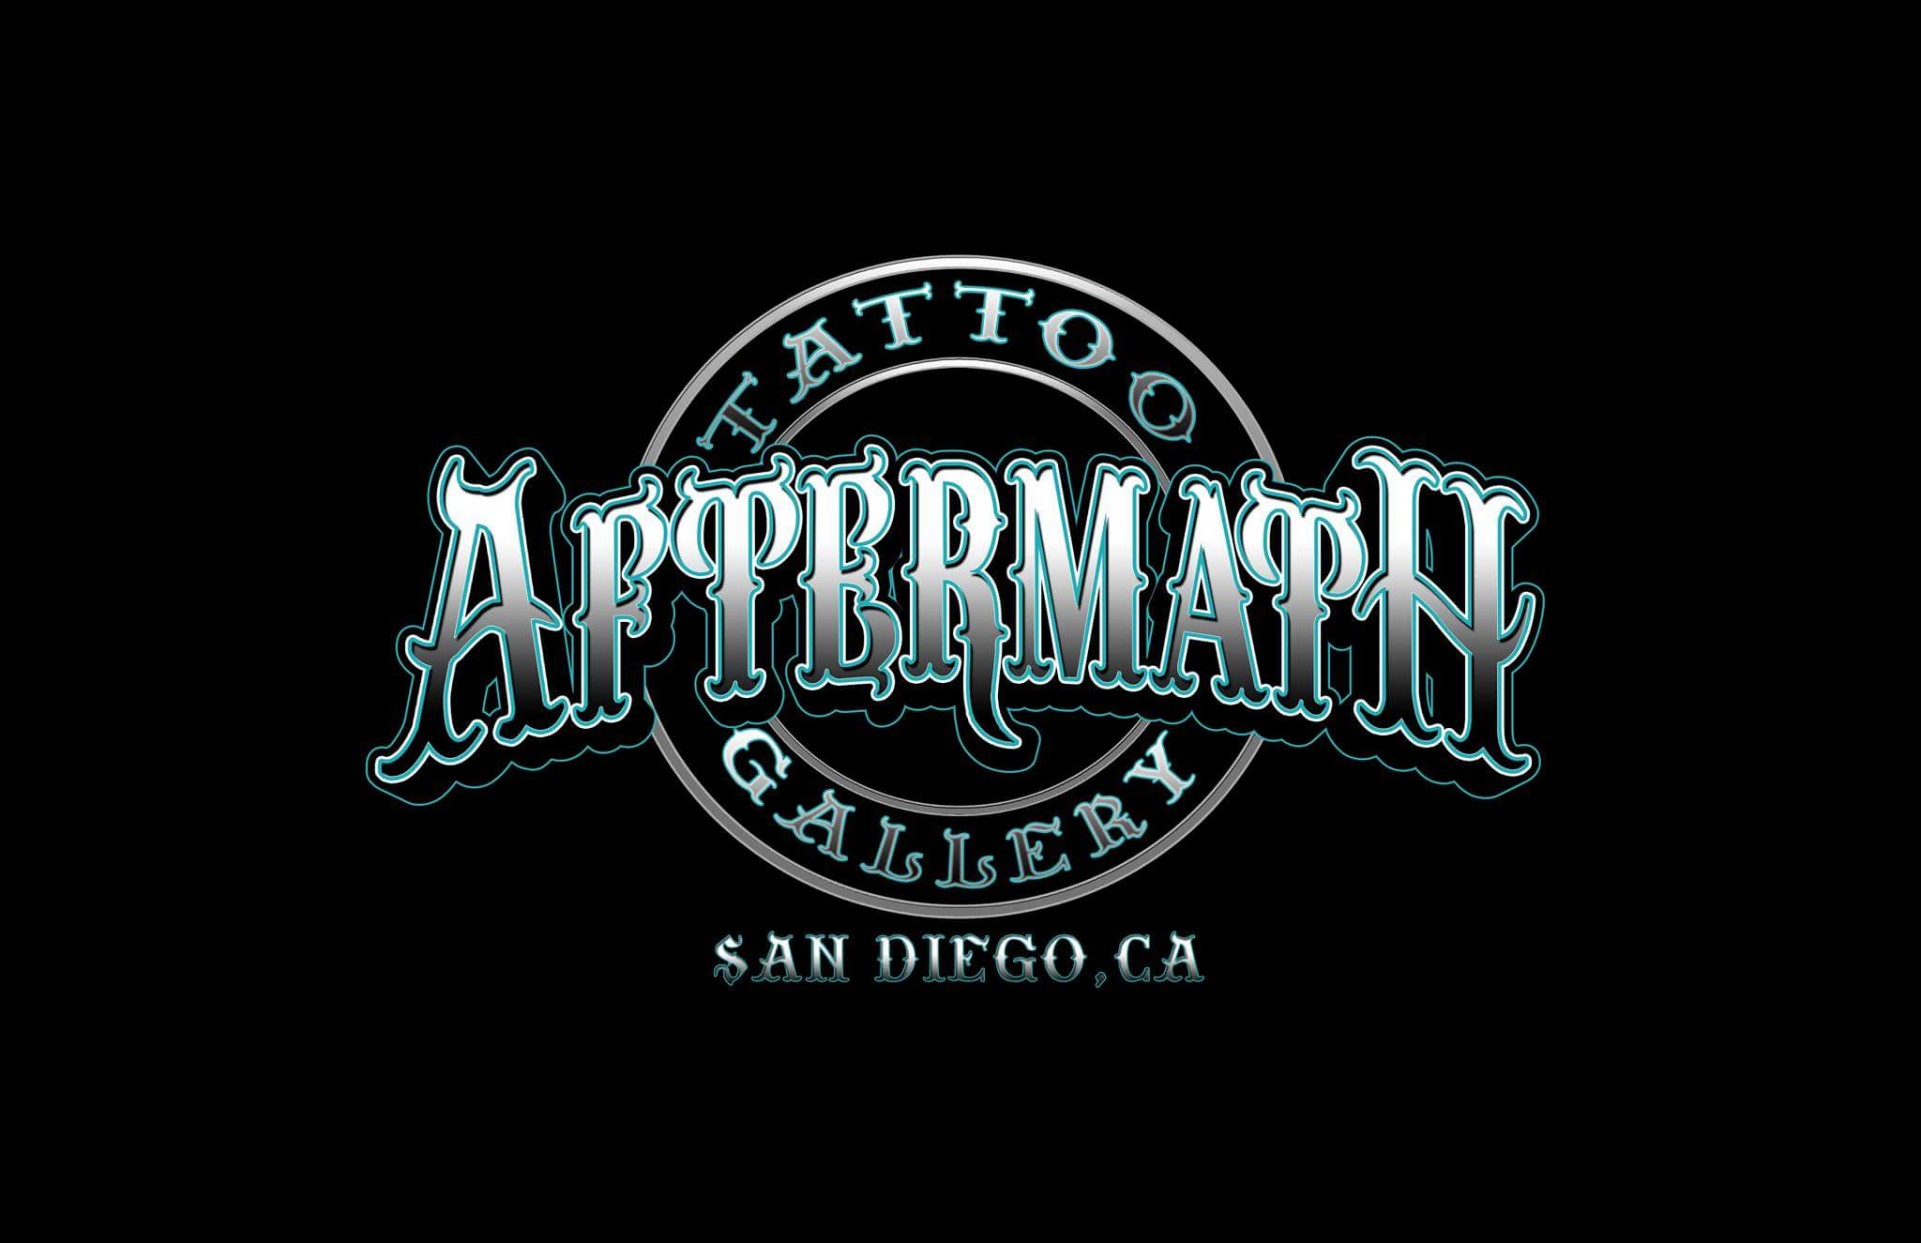 Can anyone identify this font used for AFTERMATH TATTOO GALLERY?